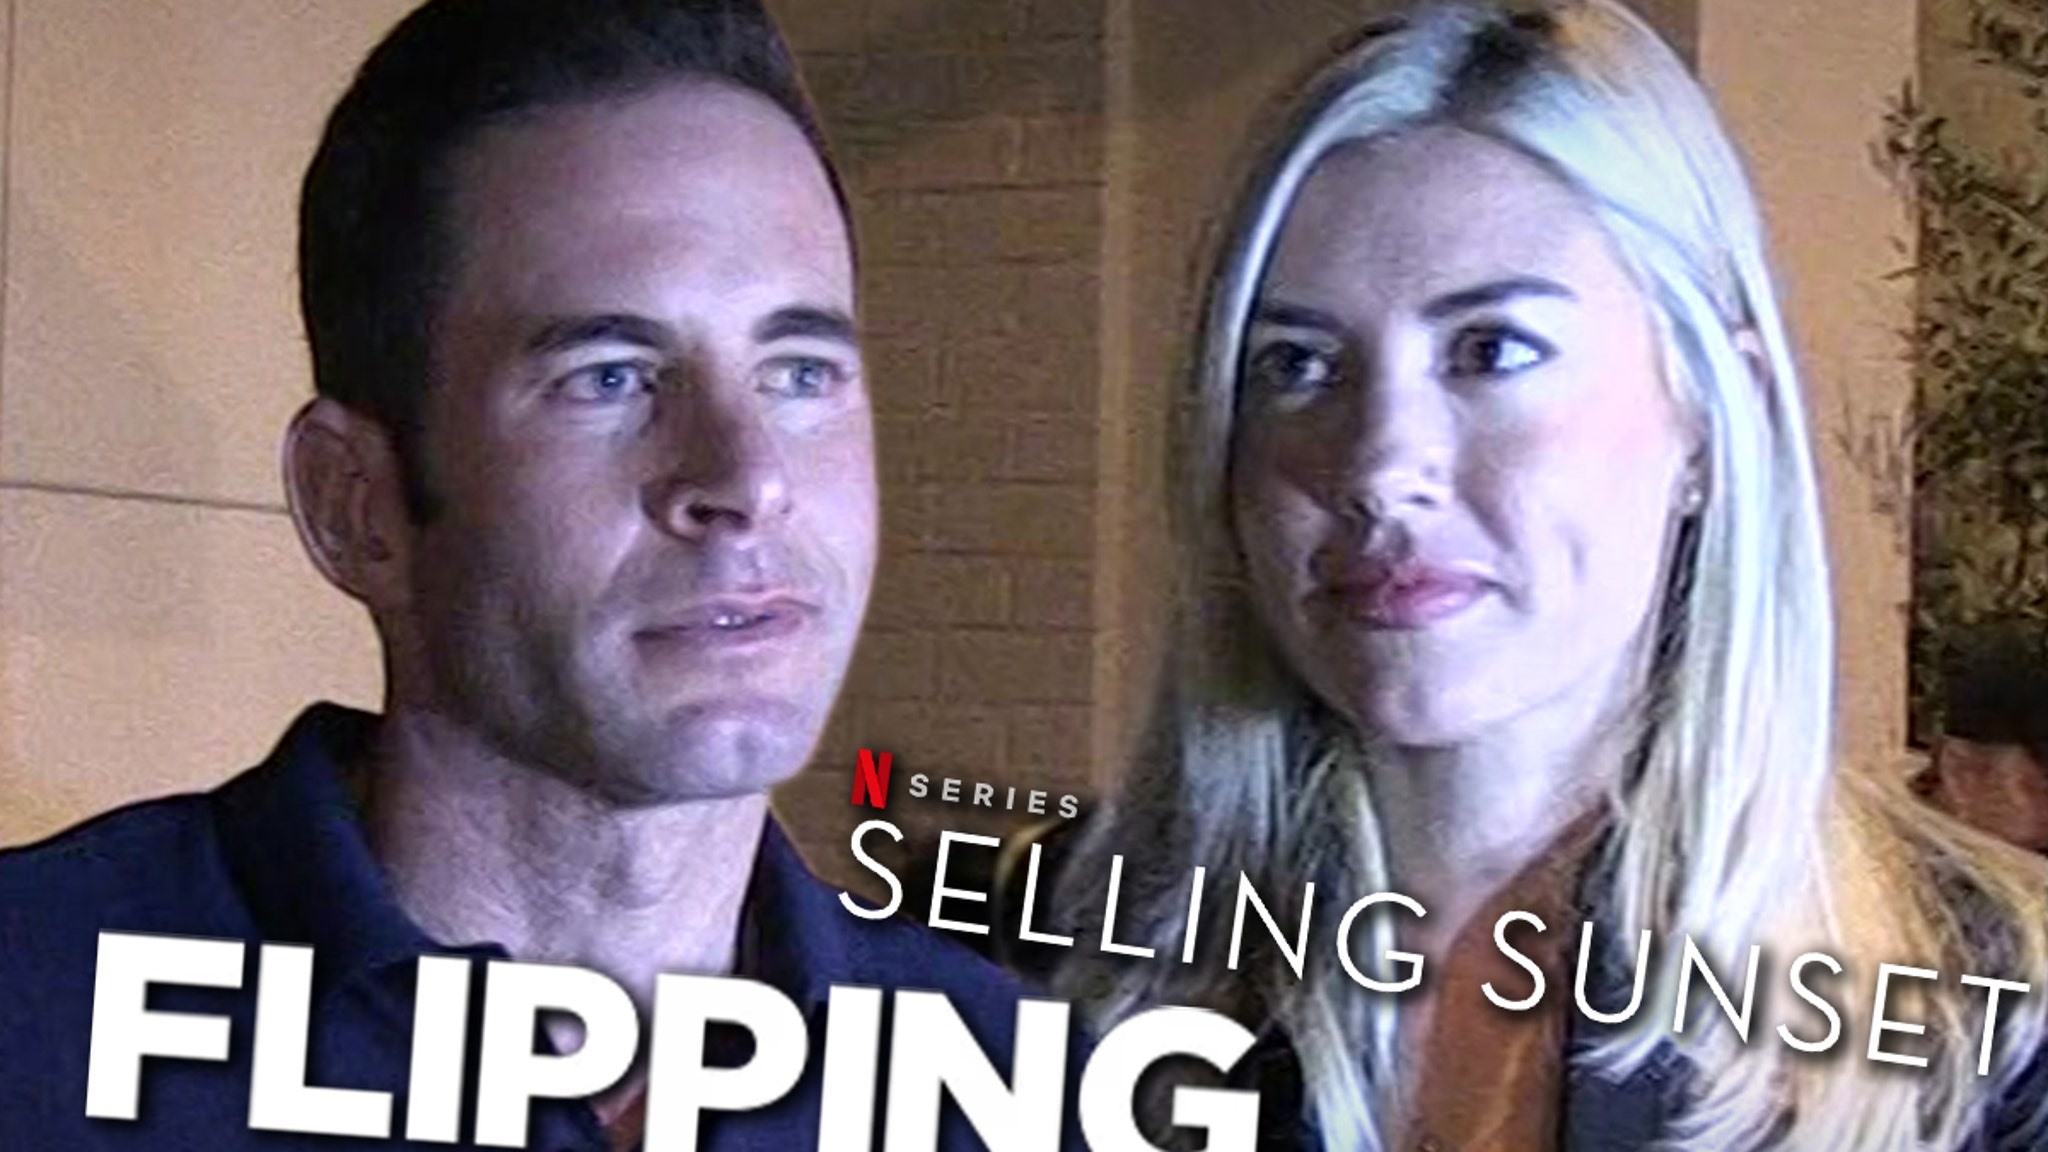 Tarek El Moussa Positive for COVID Impacts His Show and ‘Selling Sunset’ – TMZ